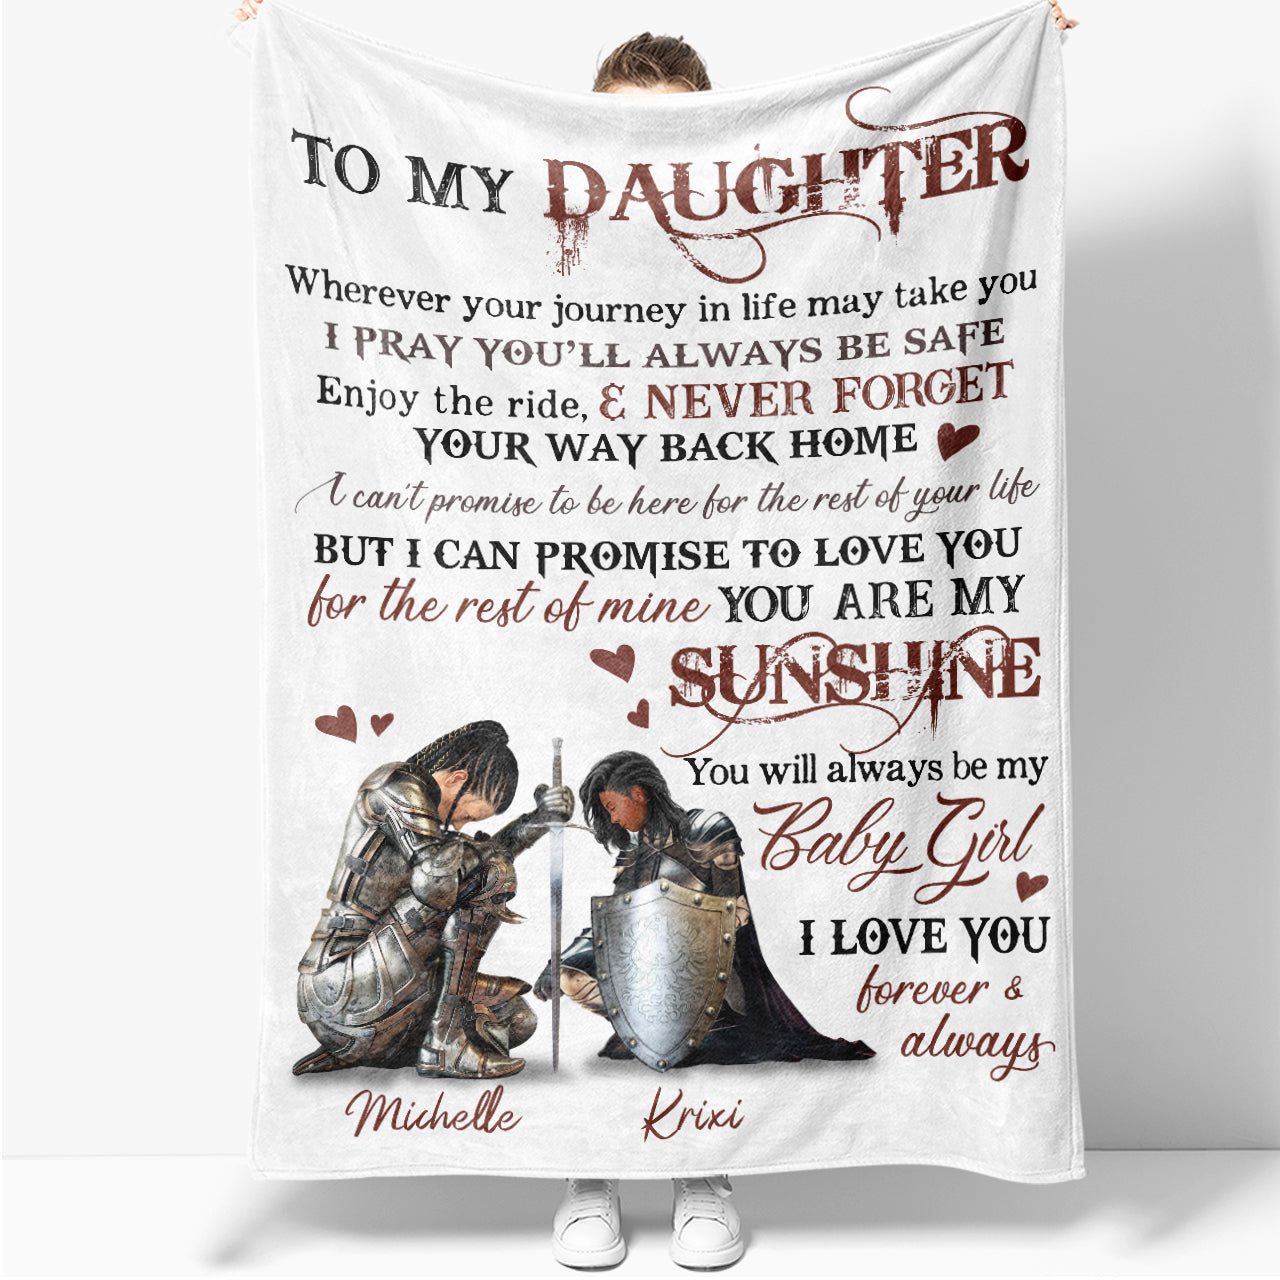 Personalized Mom And Daughter Warrior To My Daughter No Matter Where Your Journey Takes You Fleece Blanket